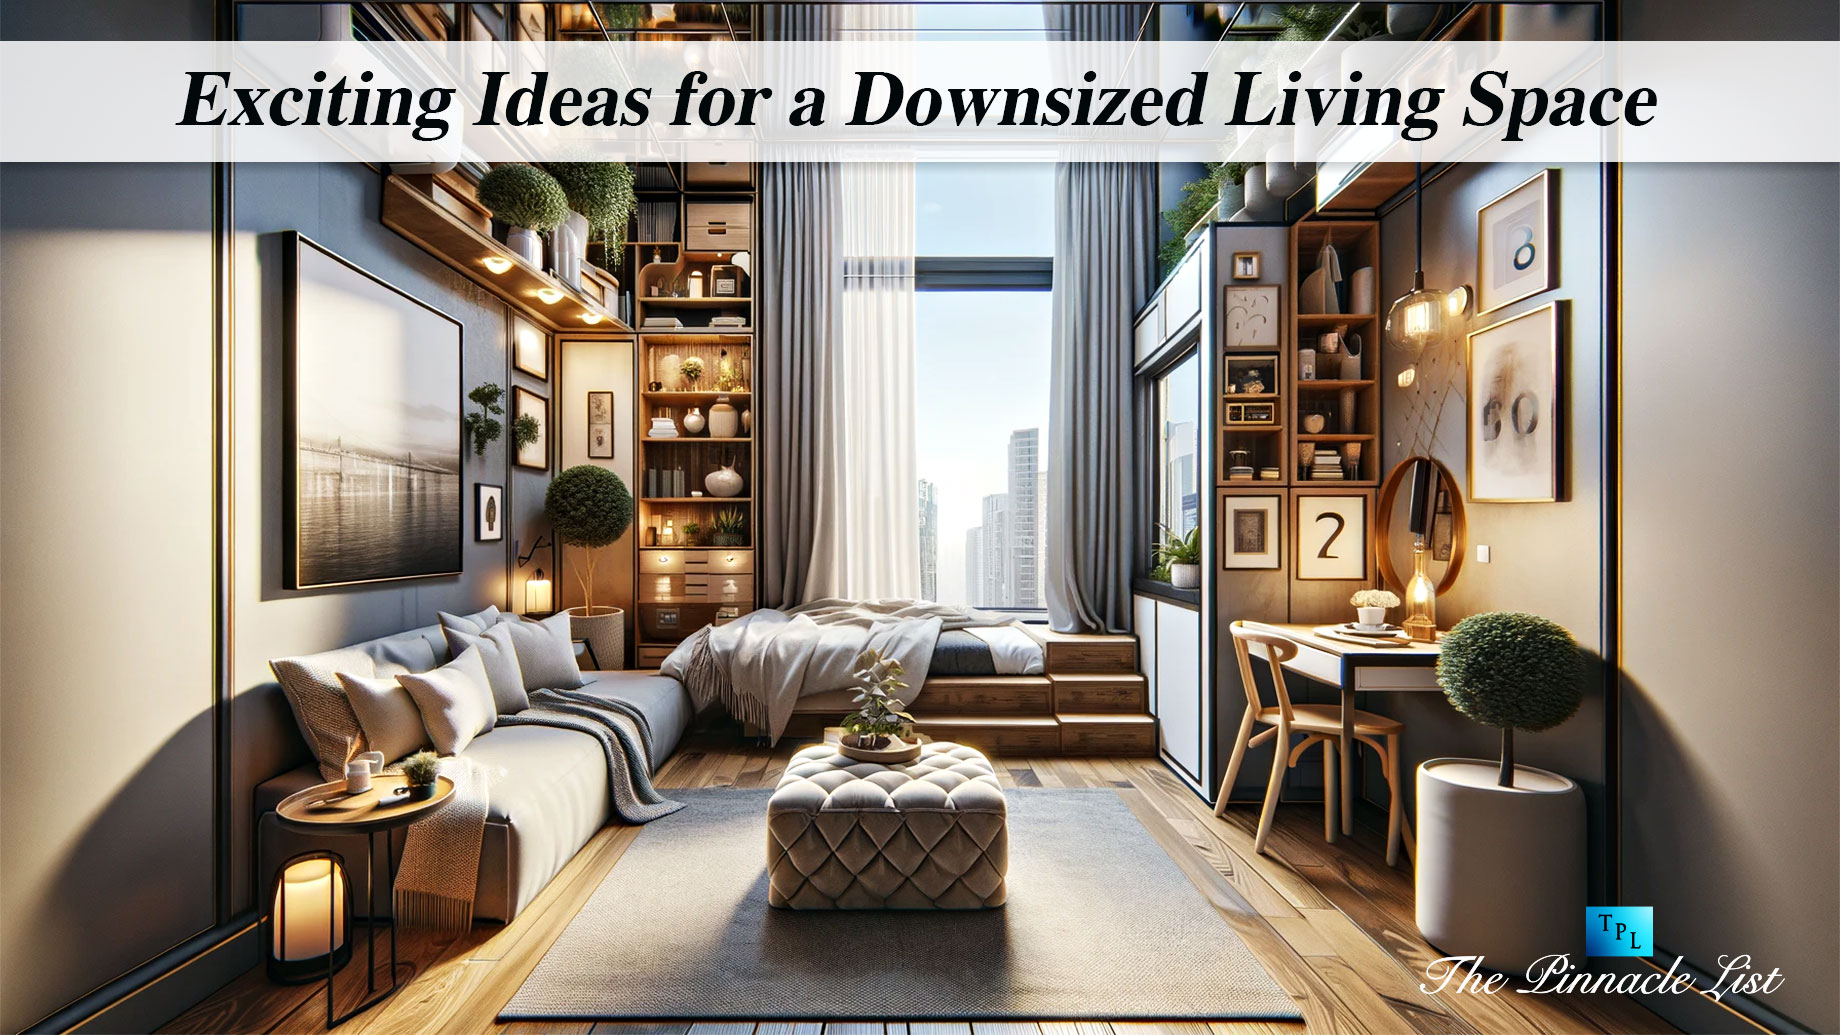 Exciting Ideas for a Downsized Living Space